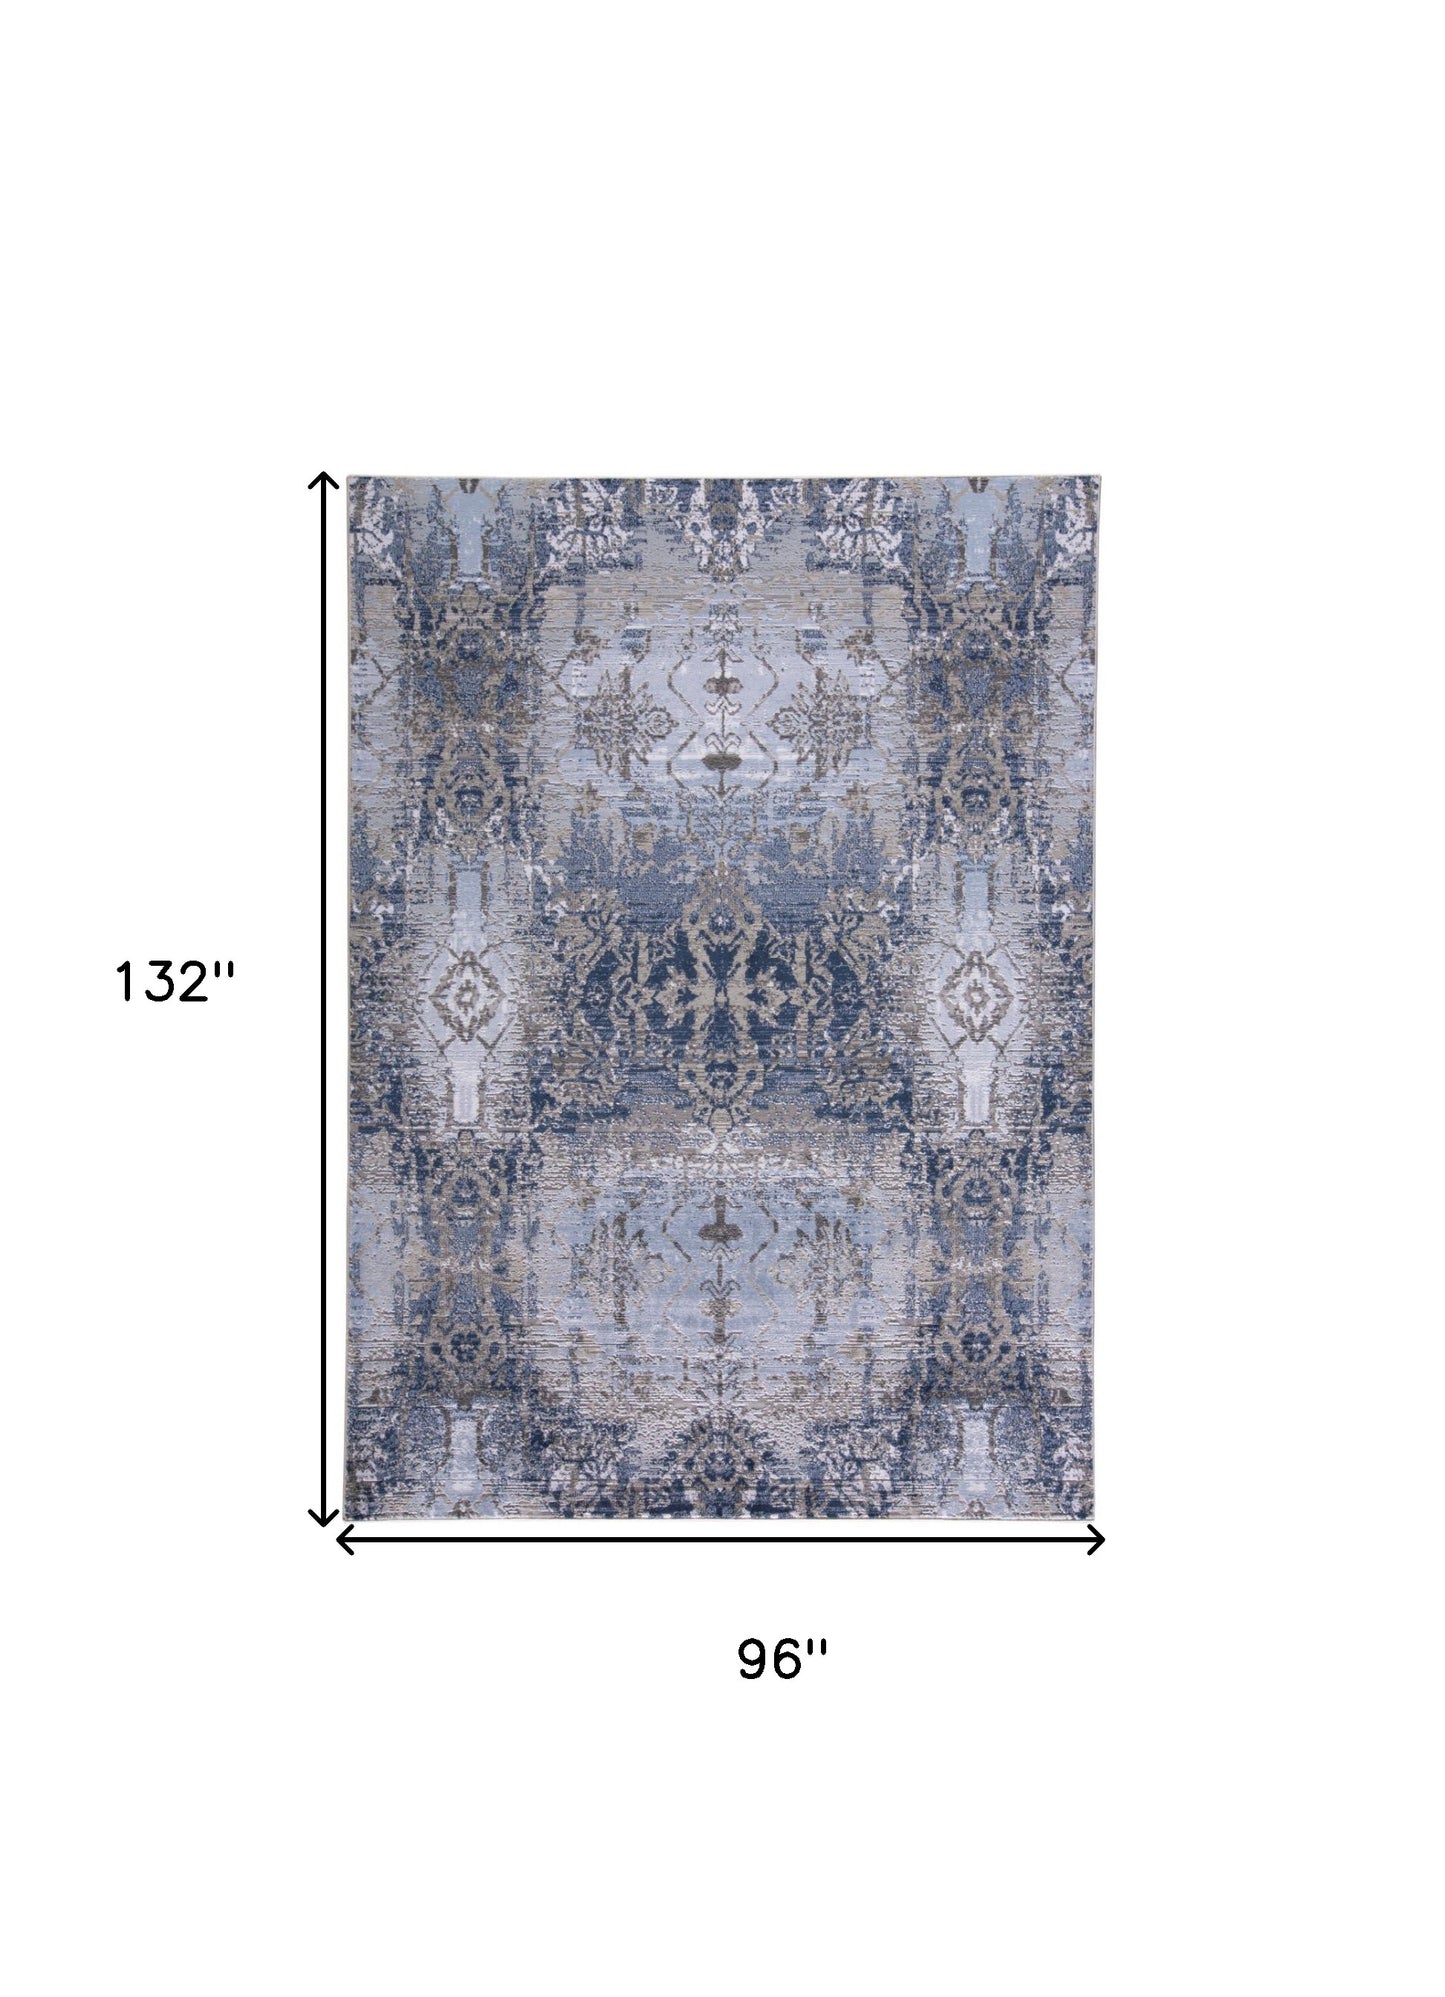 5' X 7' Blue Gray And Taupe Abstract Stain Resistant Area Rug